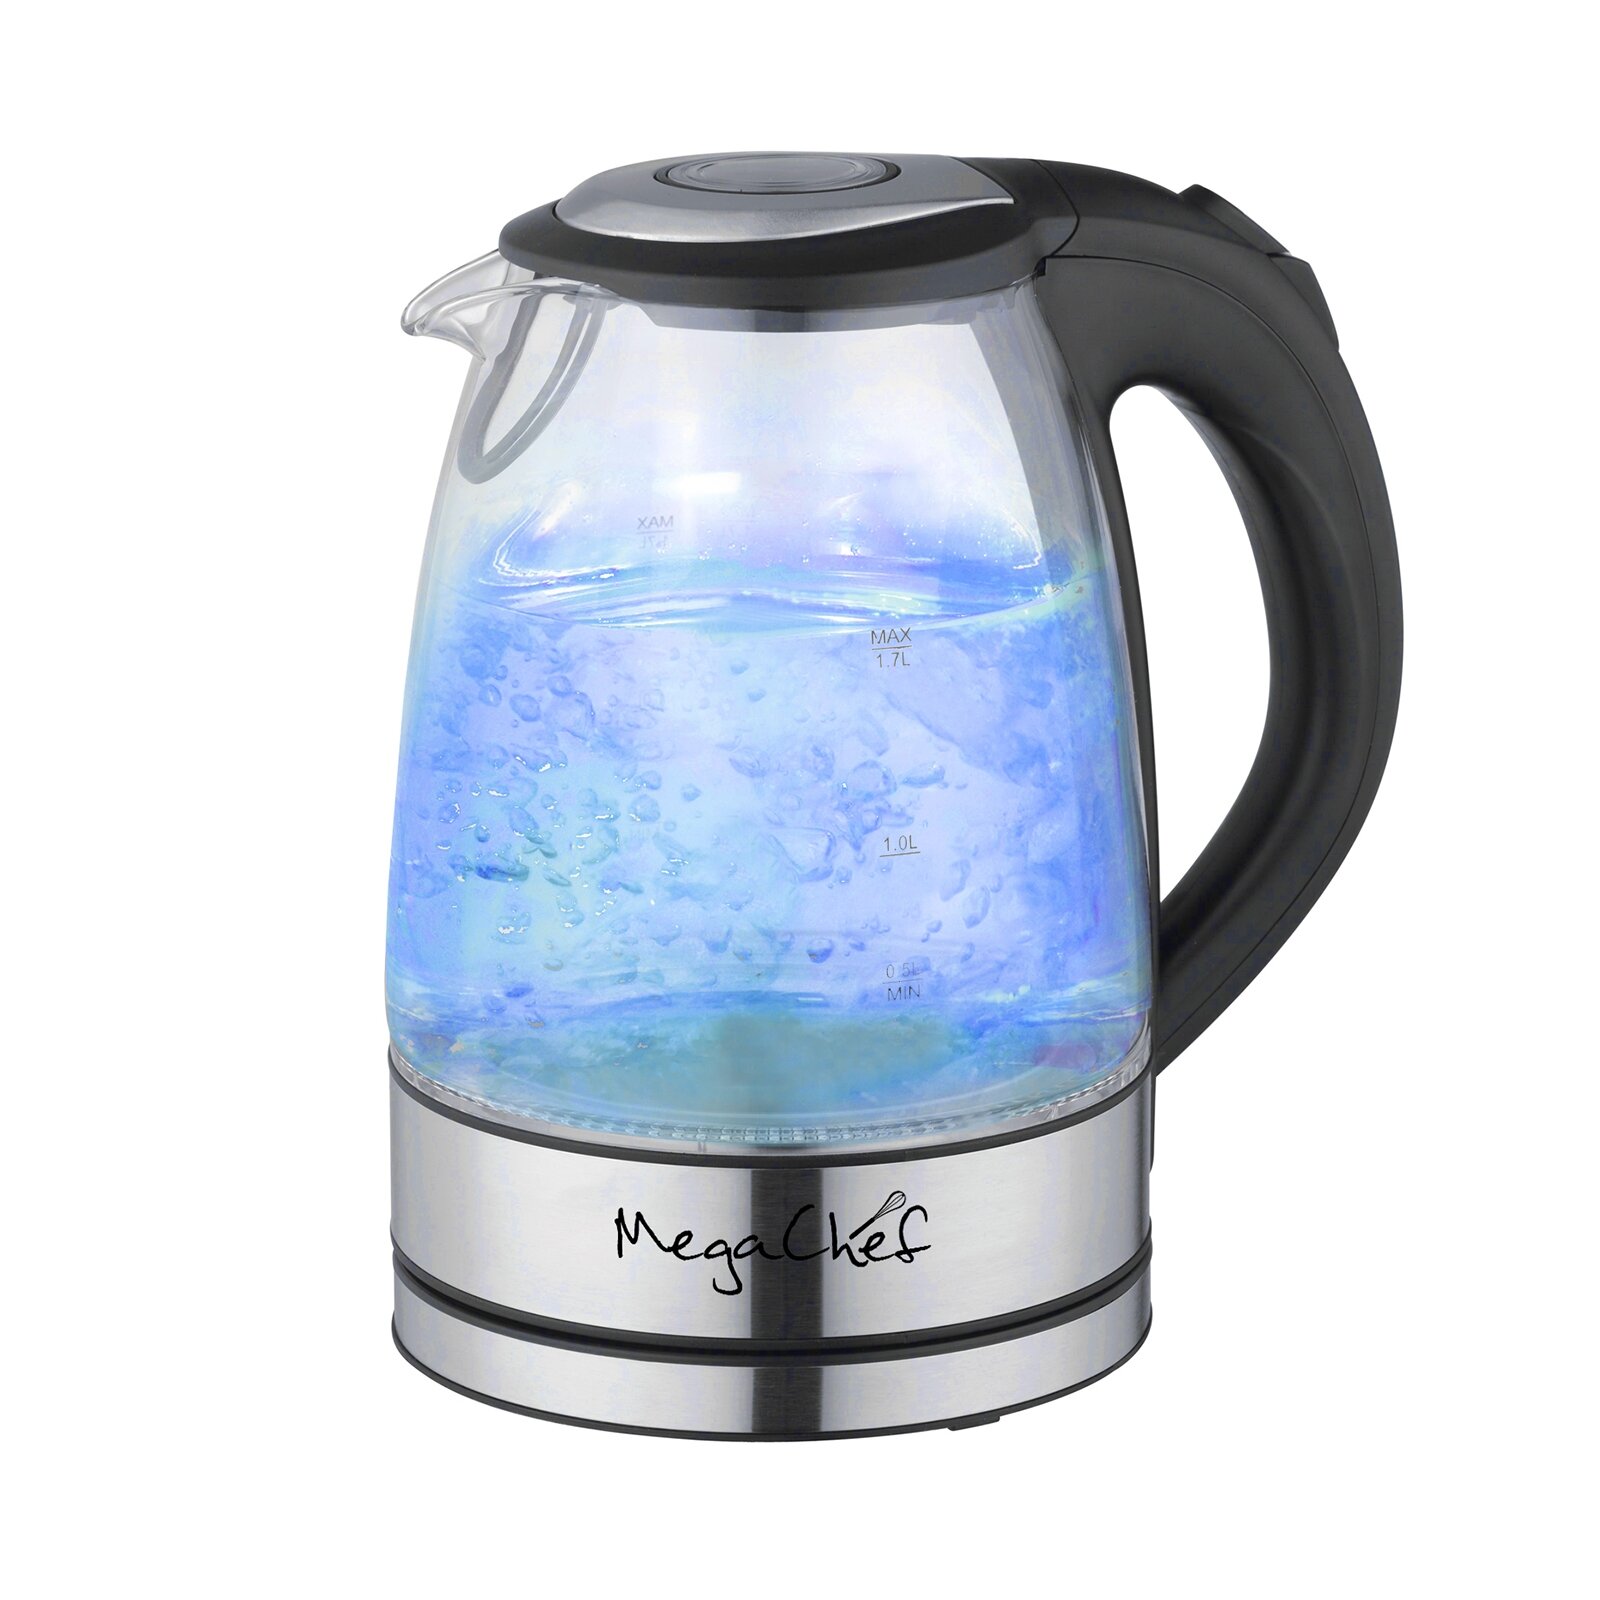 Ovente Glass Electric Tea Kettle 1.8 Liter BPA Free Cordless Body, 1500W Instant  Hot Water Boiler